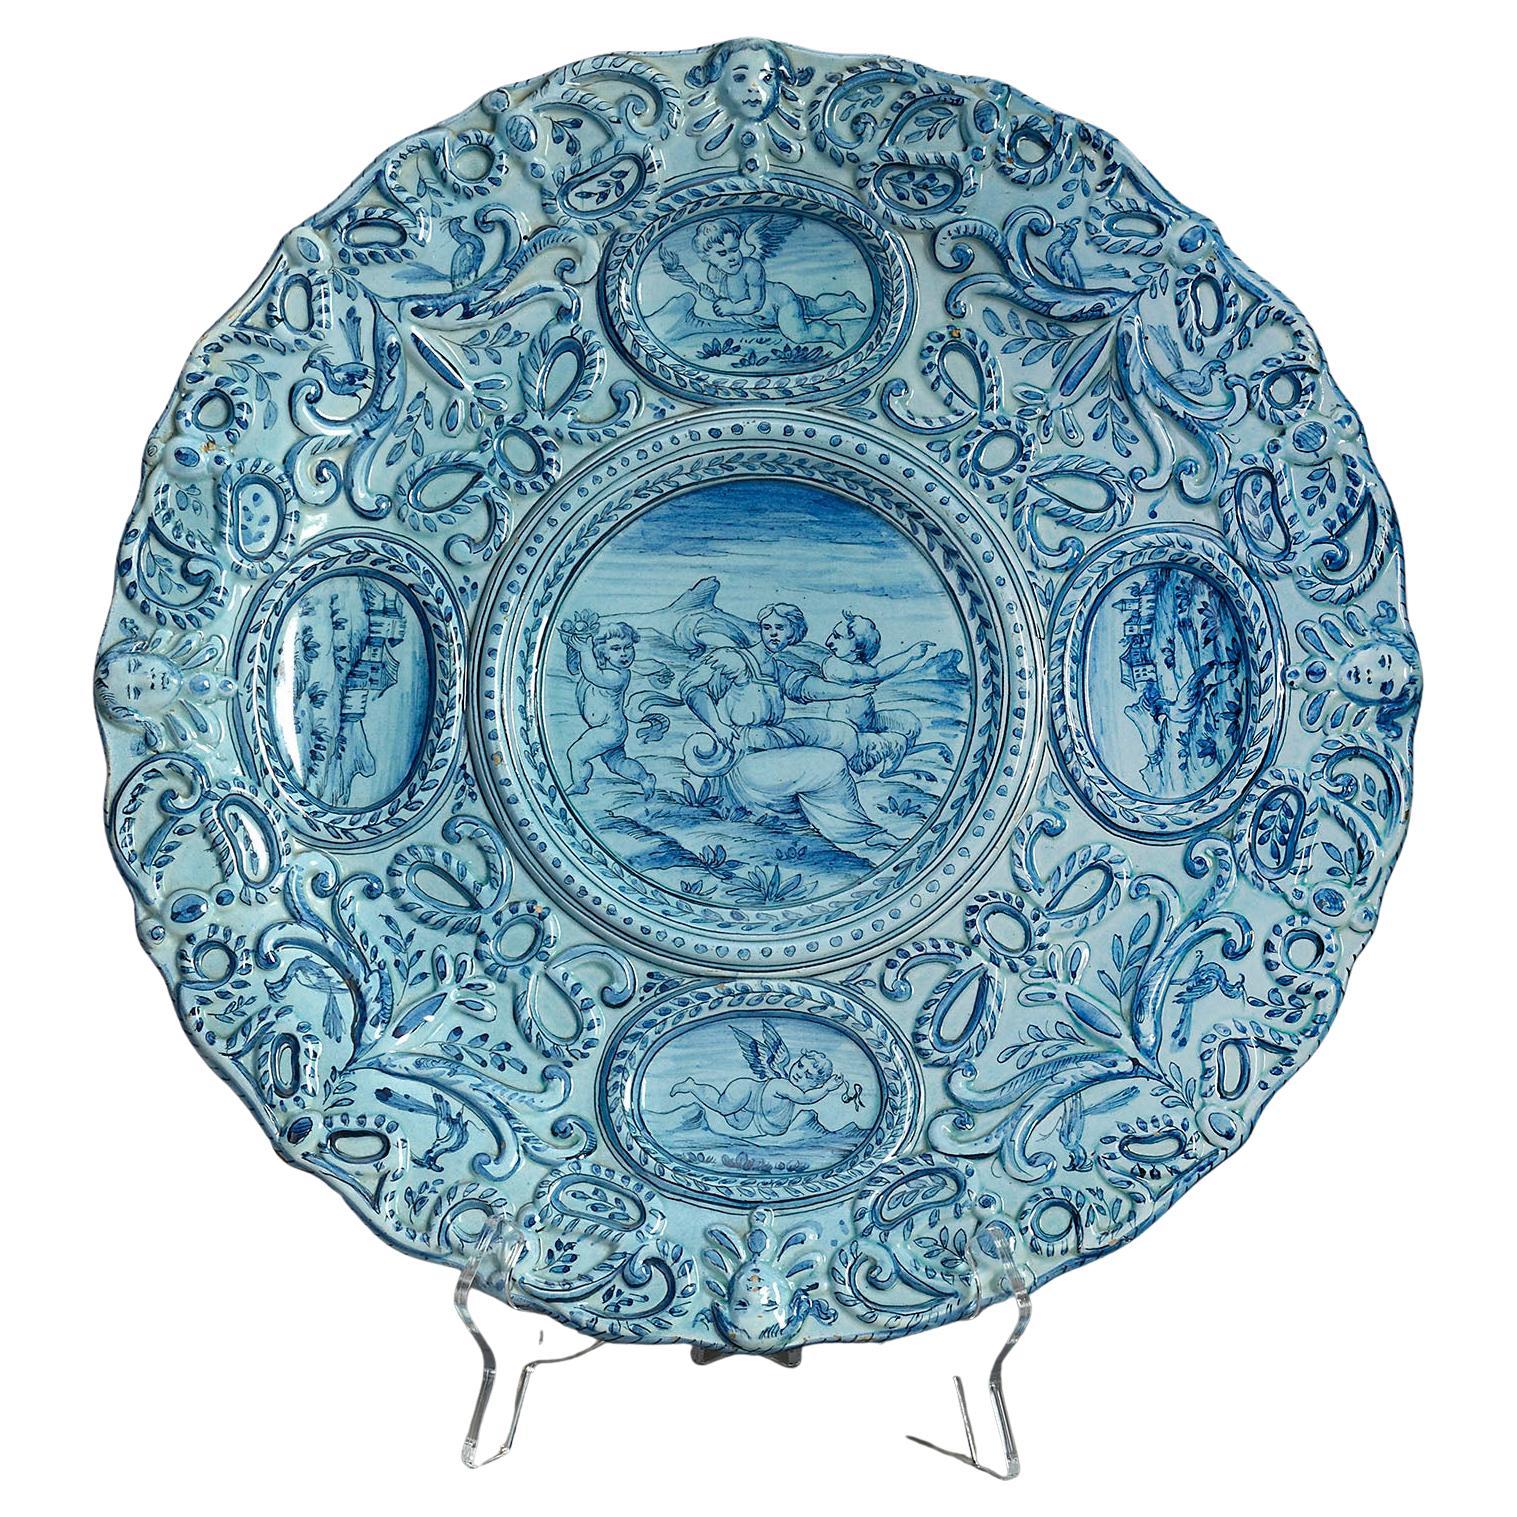 Large 19th Century Blue and White Maiolica Charger